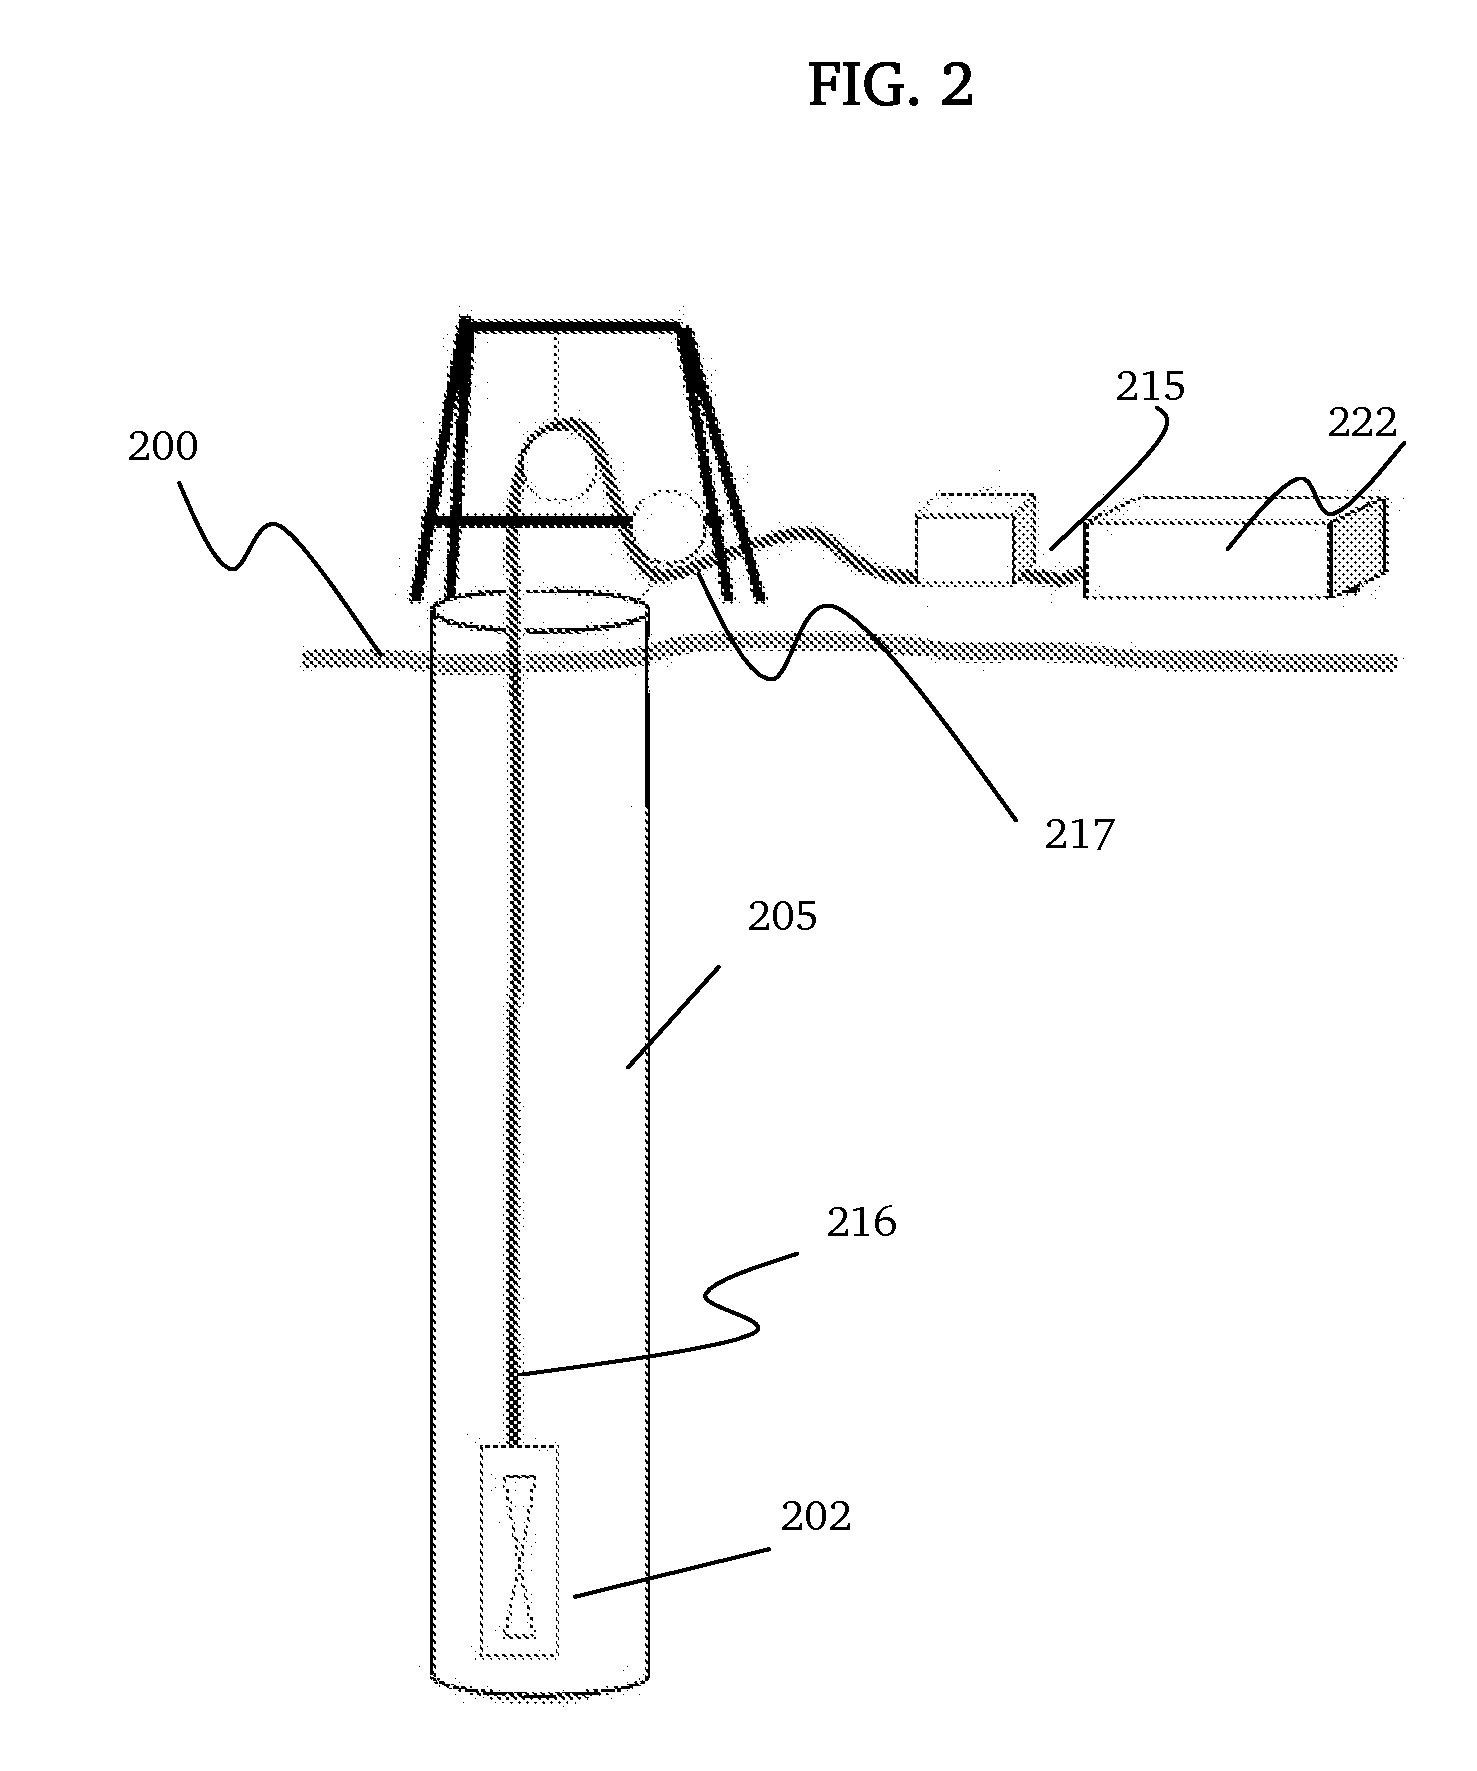 Logging device with down-hole transceiver for operation in extreme temperatures